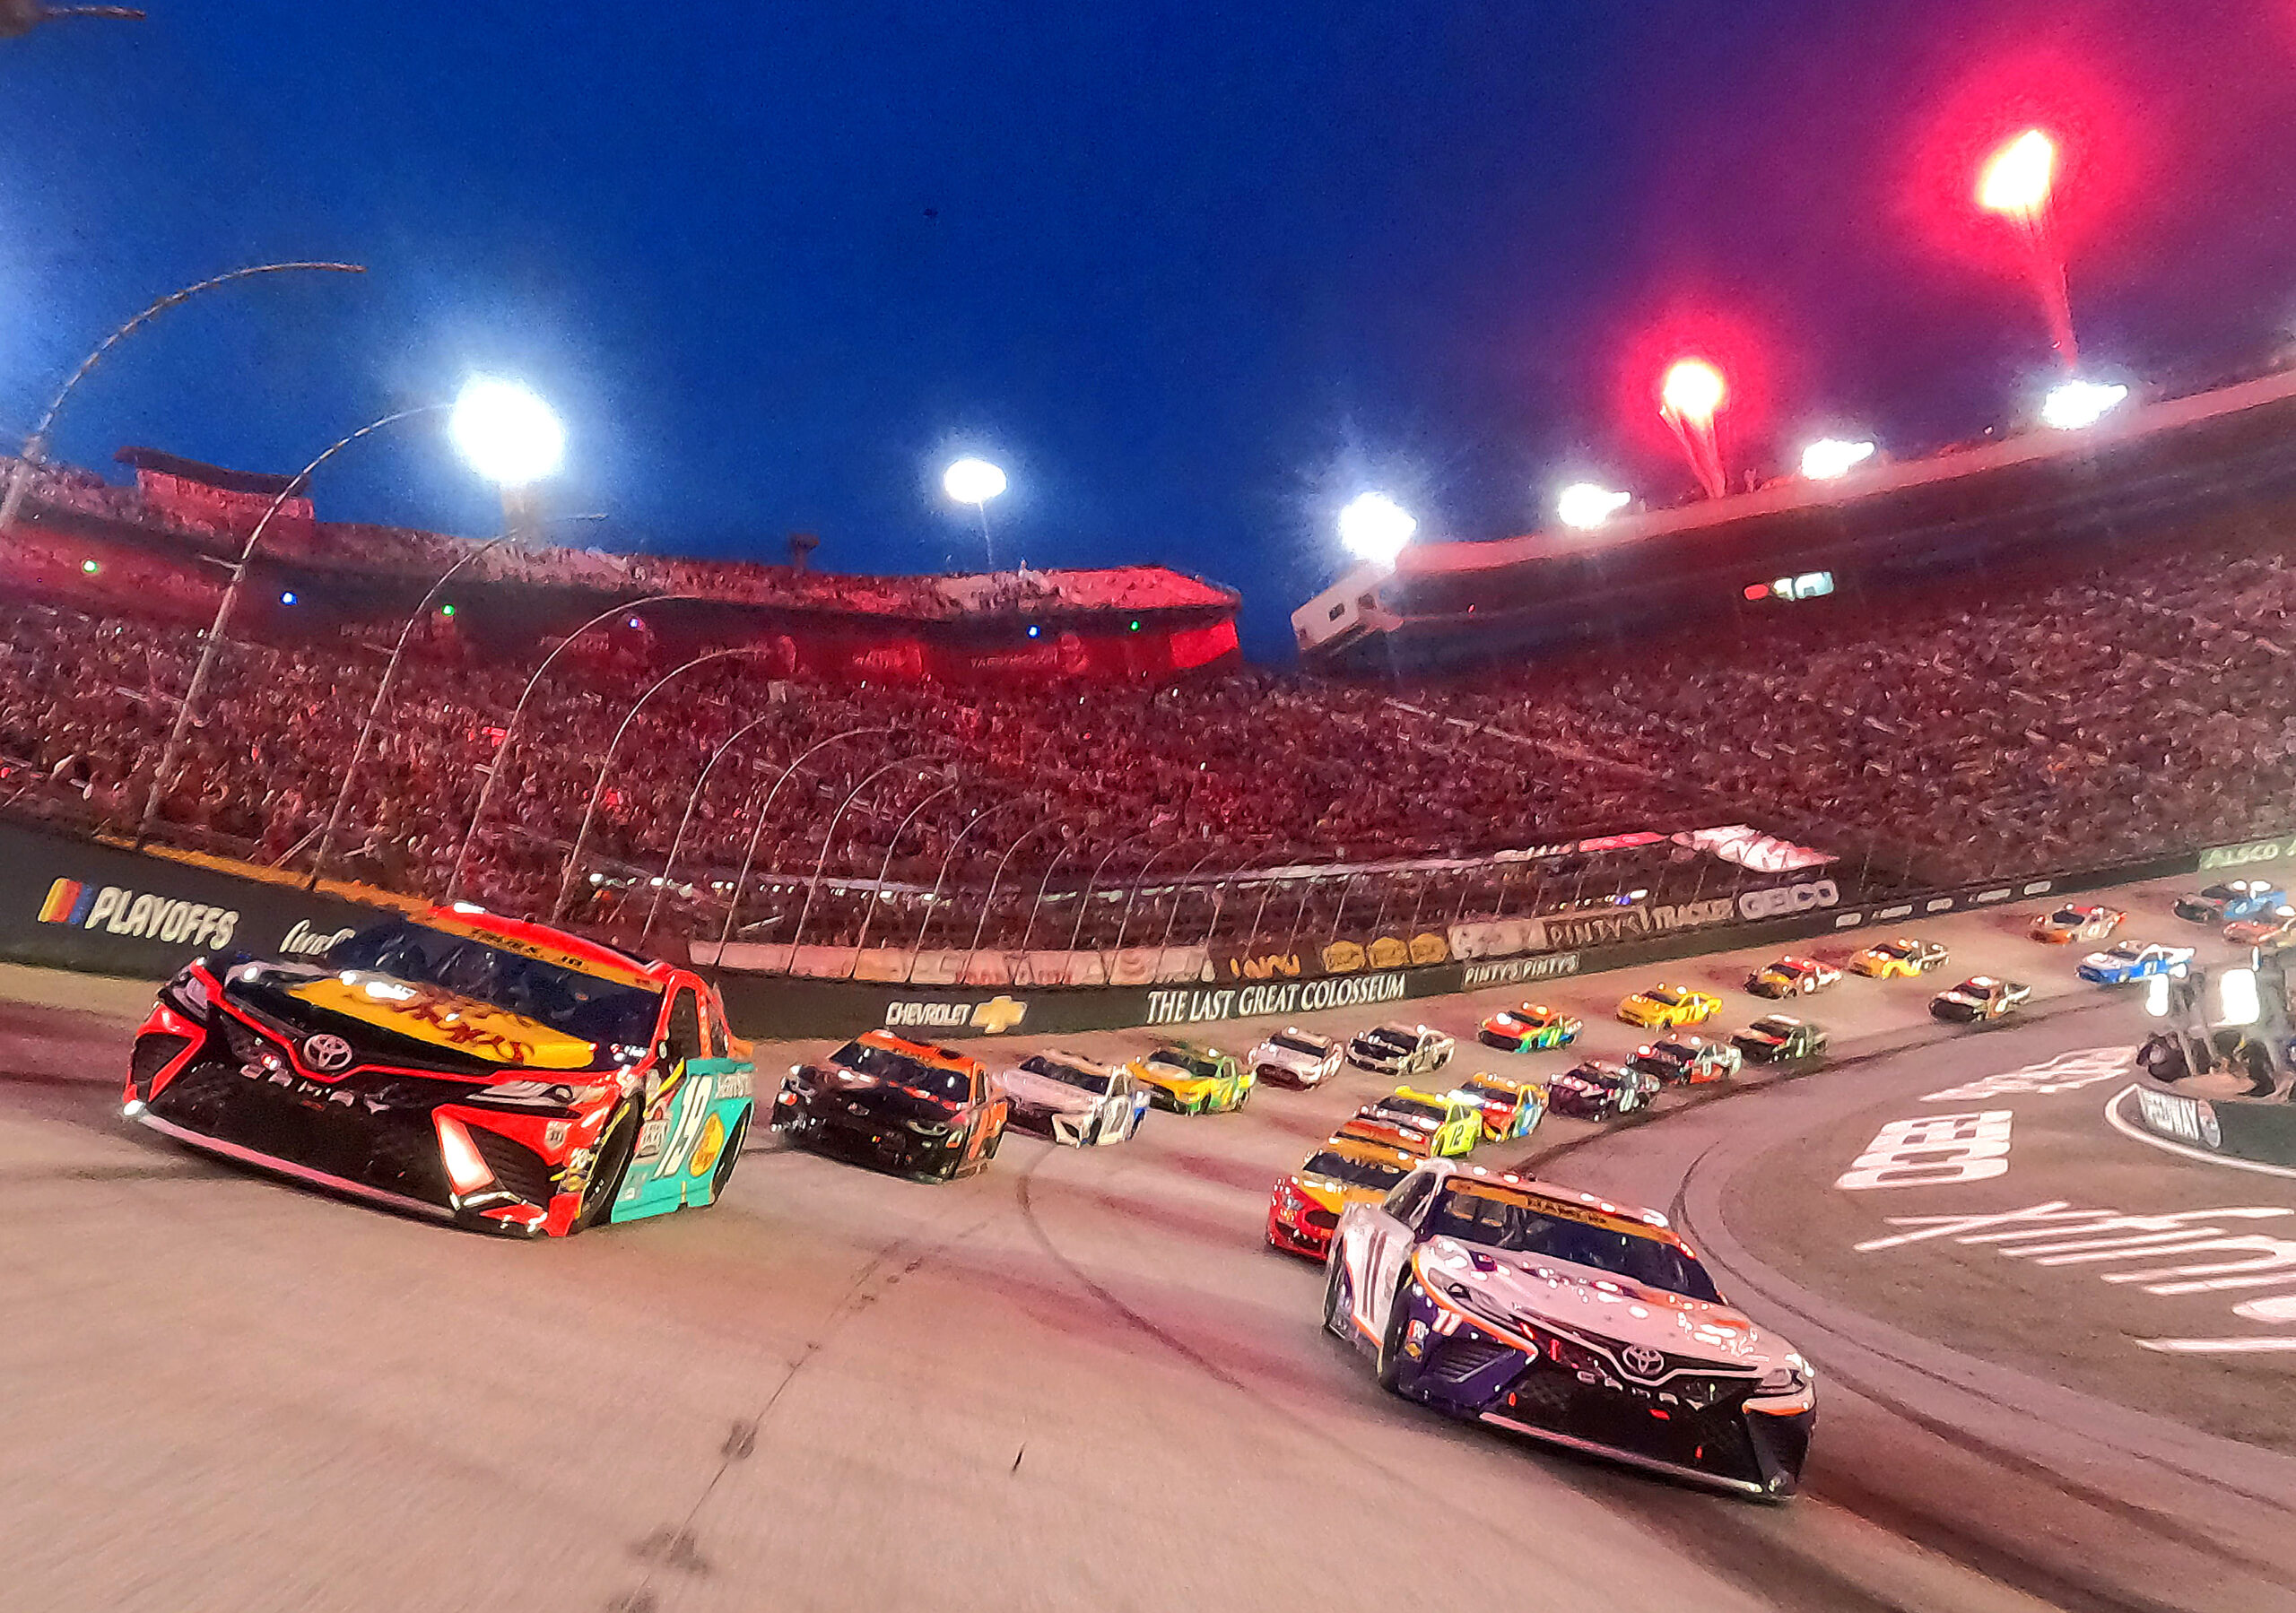 While most of the storylines surrounded the playoff drivers, it is hard to overlook a strong night for Erik Jones and Richard Petty Motorsports. (Photo Credit: Brian Lawdermilk | Getty Images)